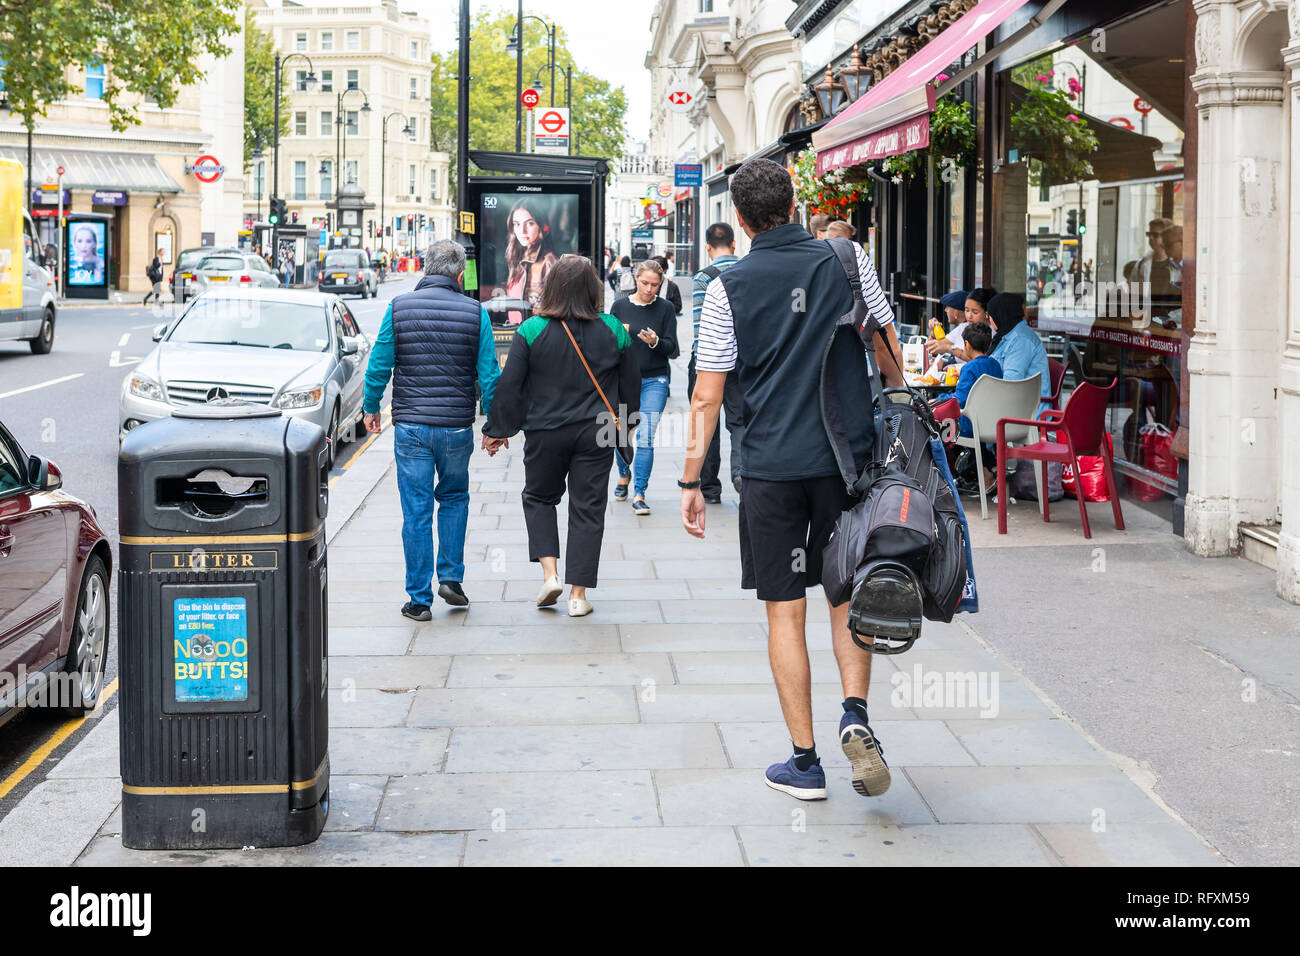 London, UK - September 16, 2018: Neighborhood district of Kensington street and road with shopping stores and people walking on sidewalk pavement by c Stock Photo